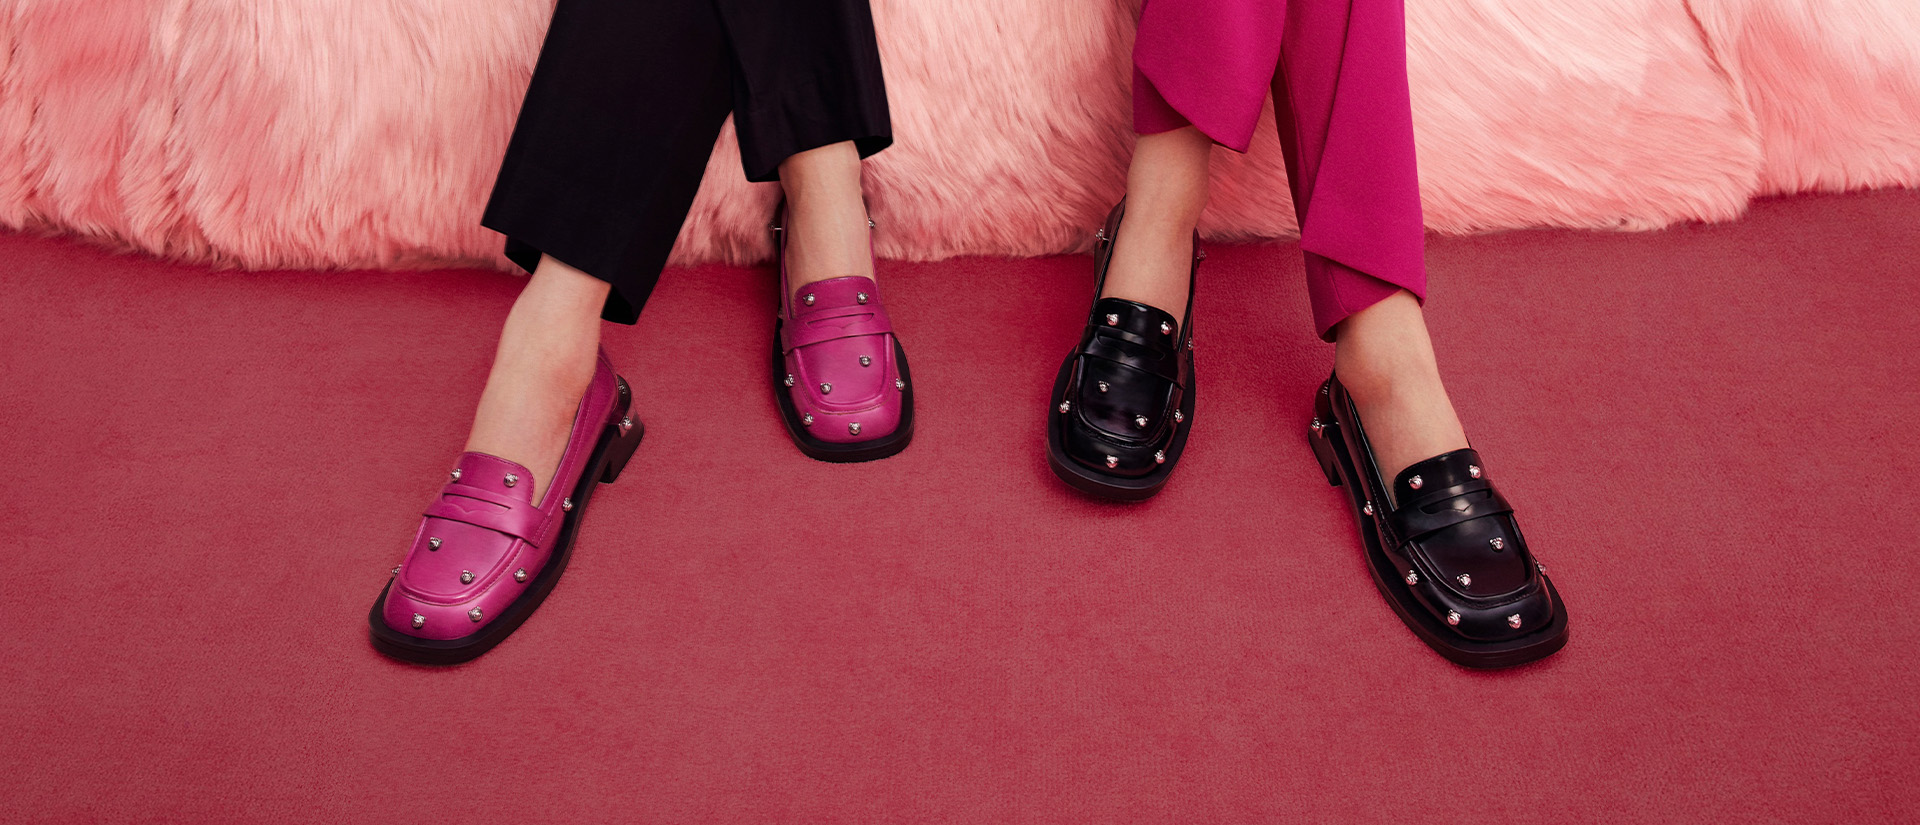 Women’s Lotso Studded Penny Loafers in fuchsia and black  - CHARLES & KEITH